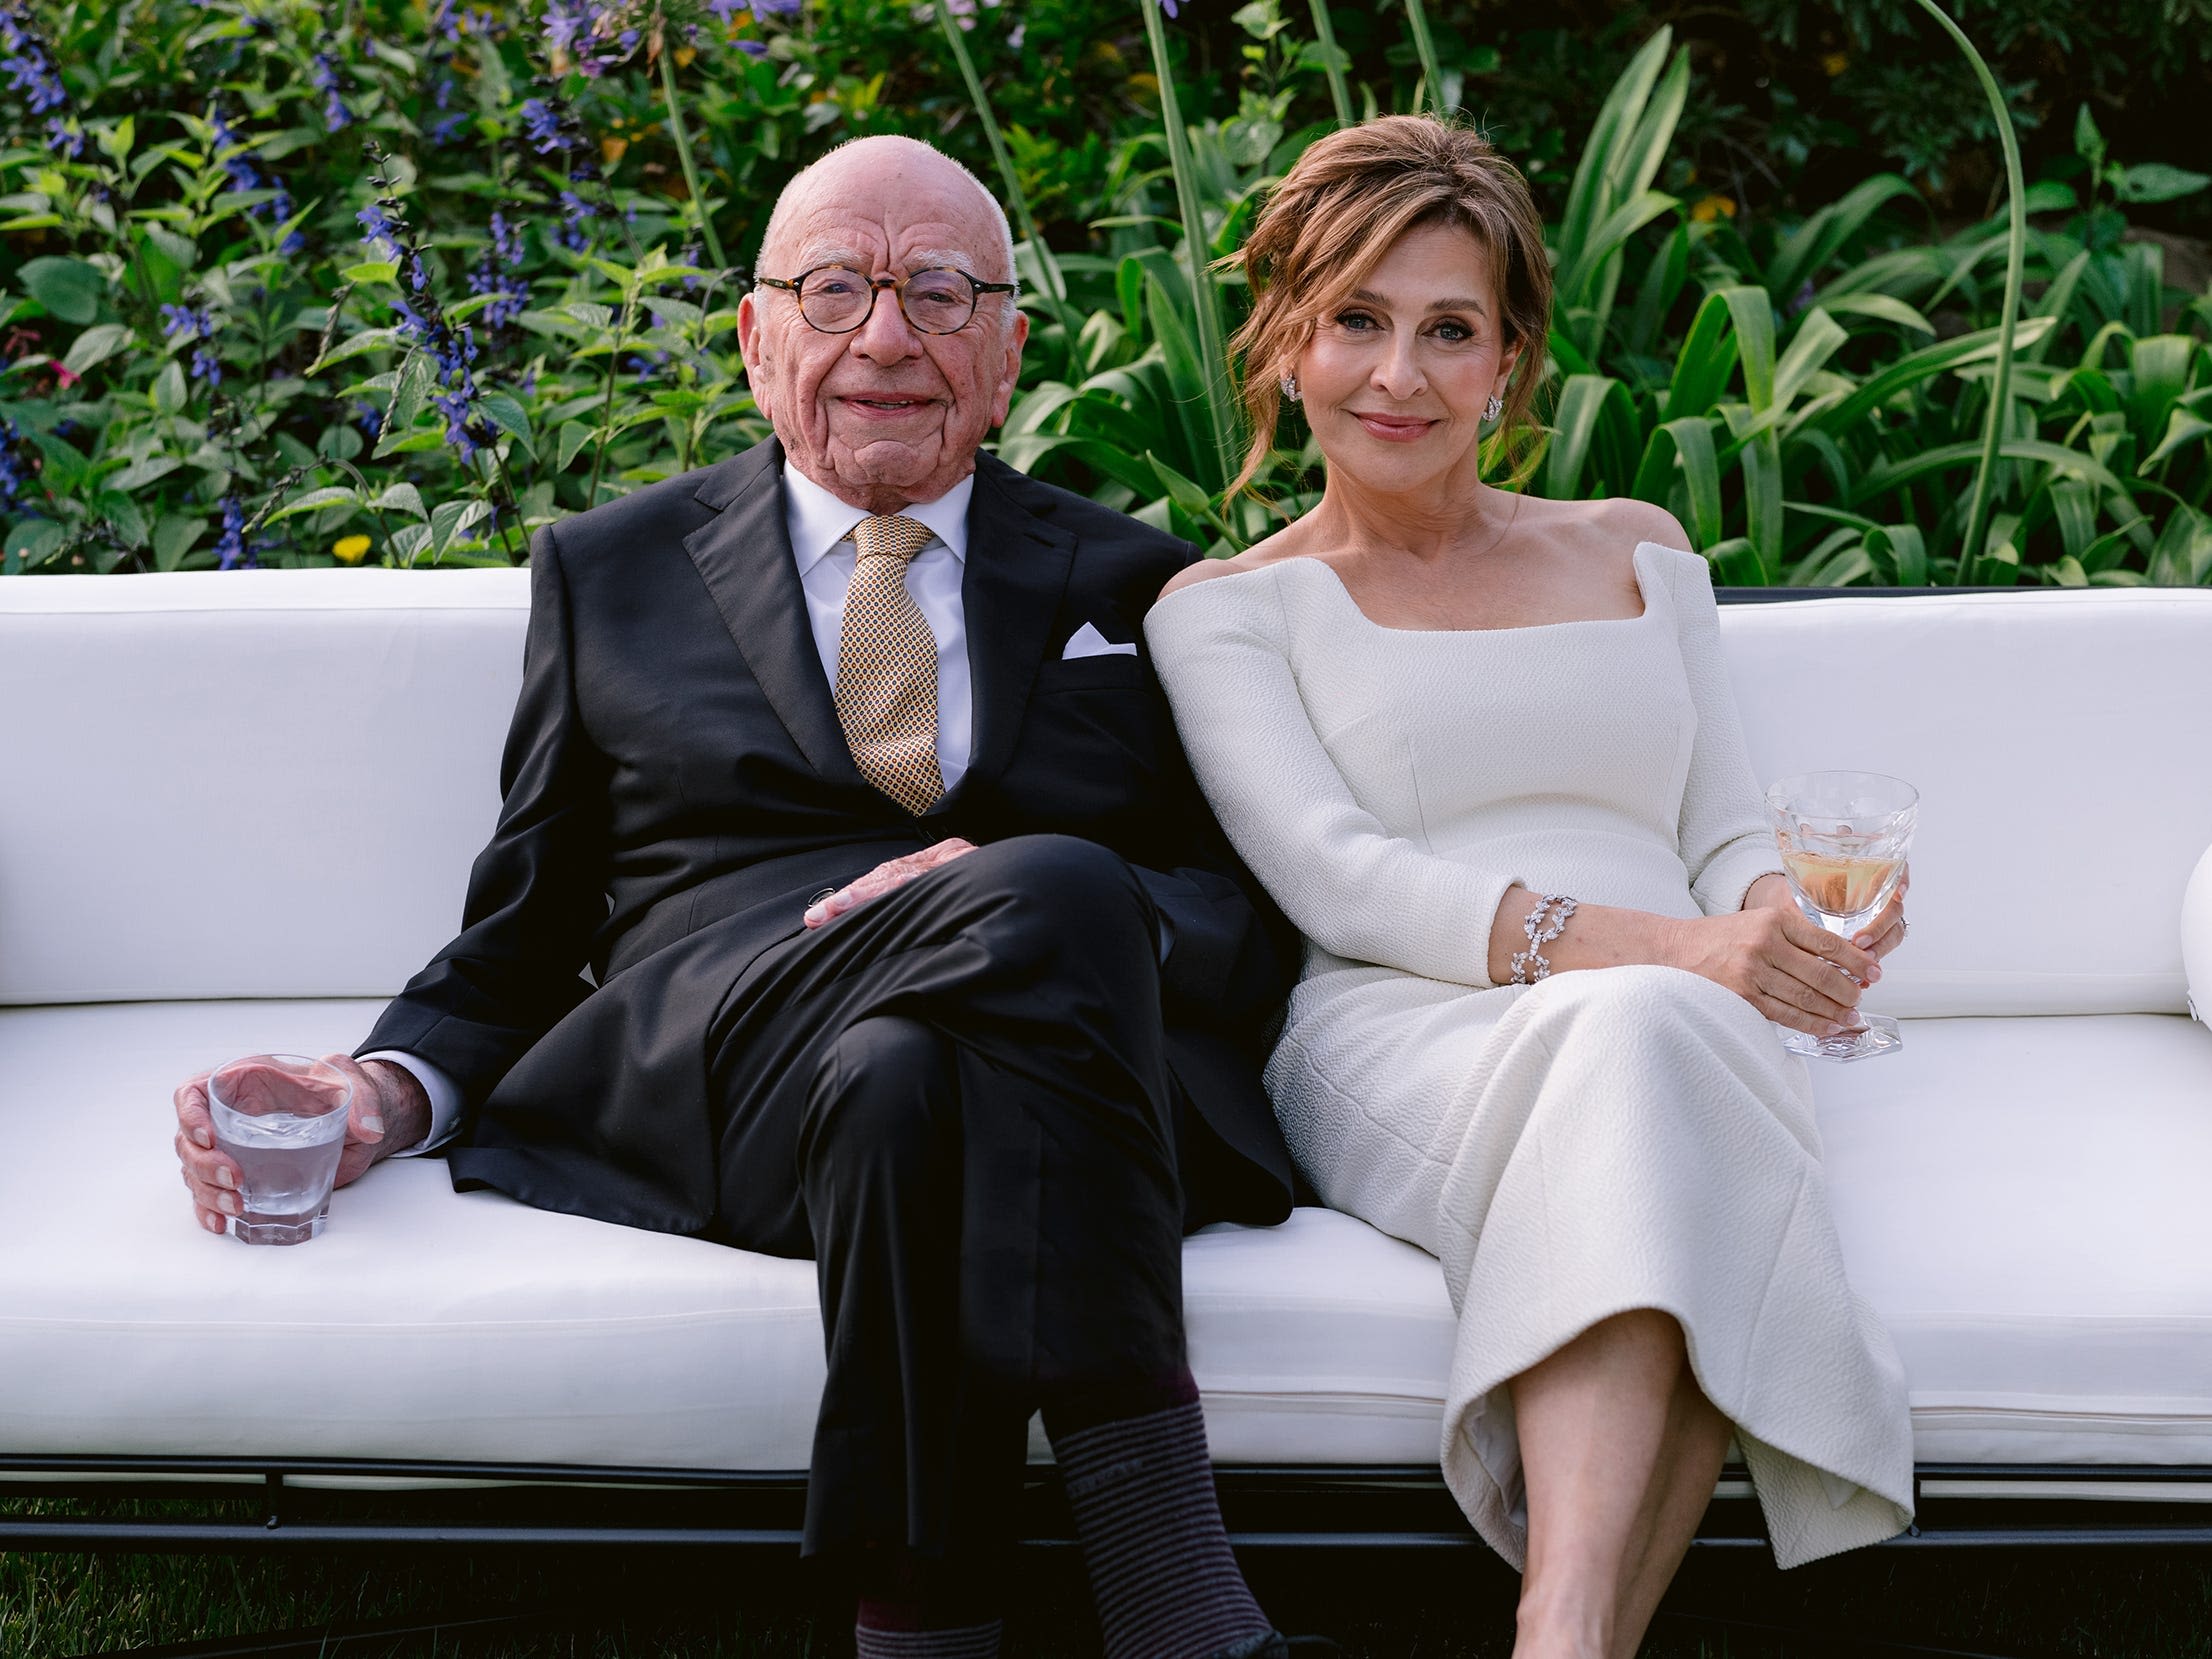 Rupert Murdoch, 93, just got married for the 5th time. Here's a timeline of his past marriages.